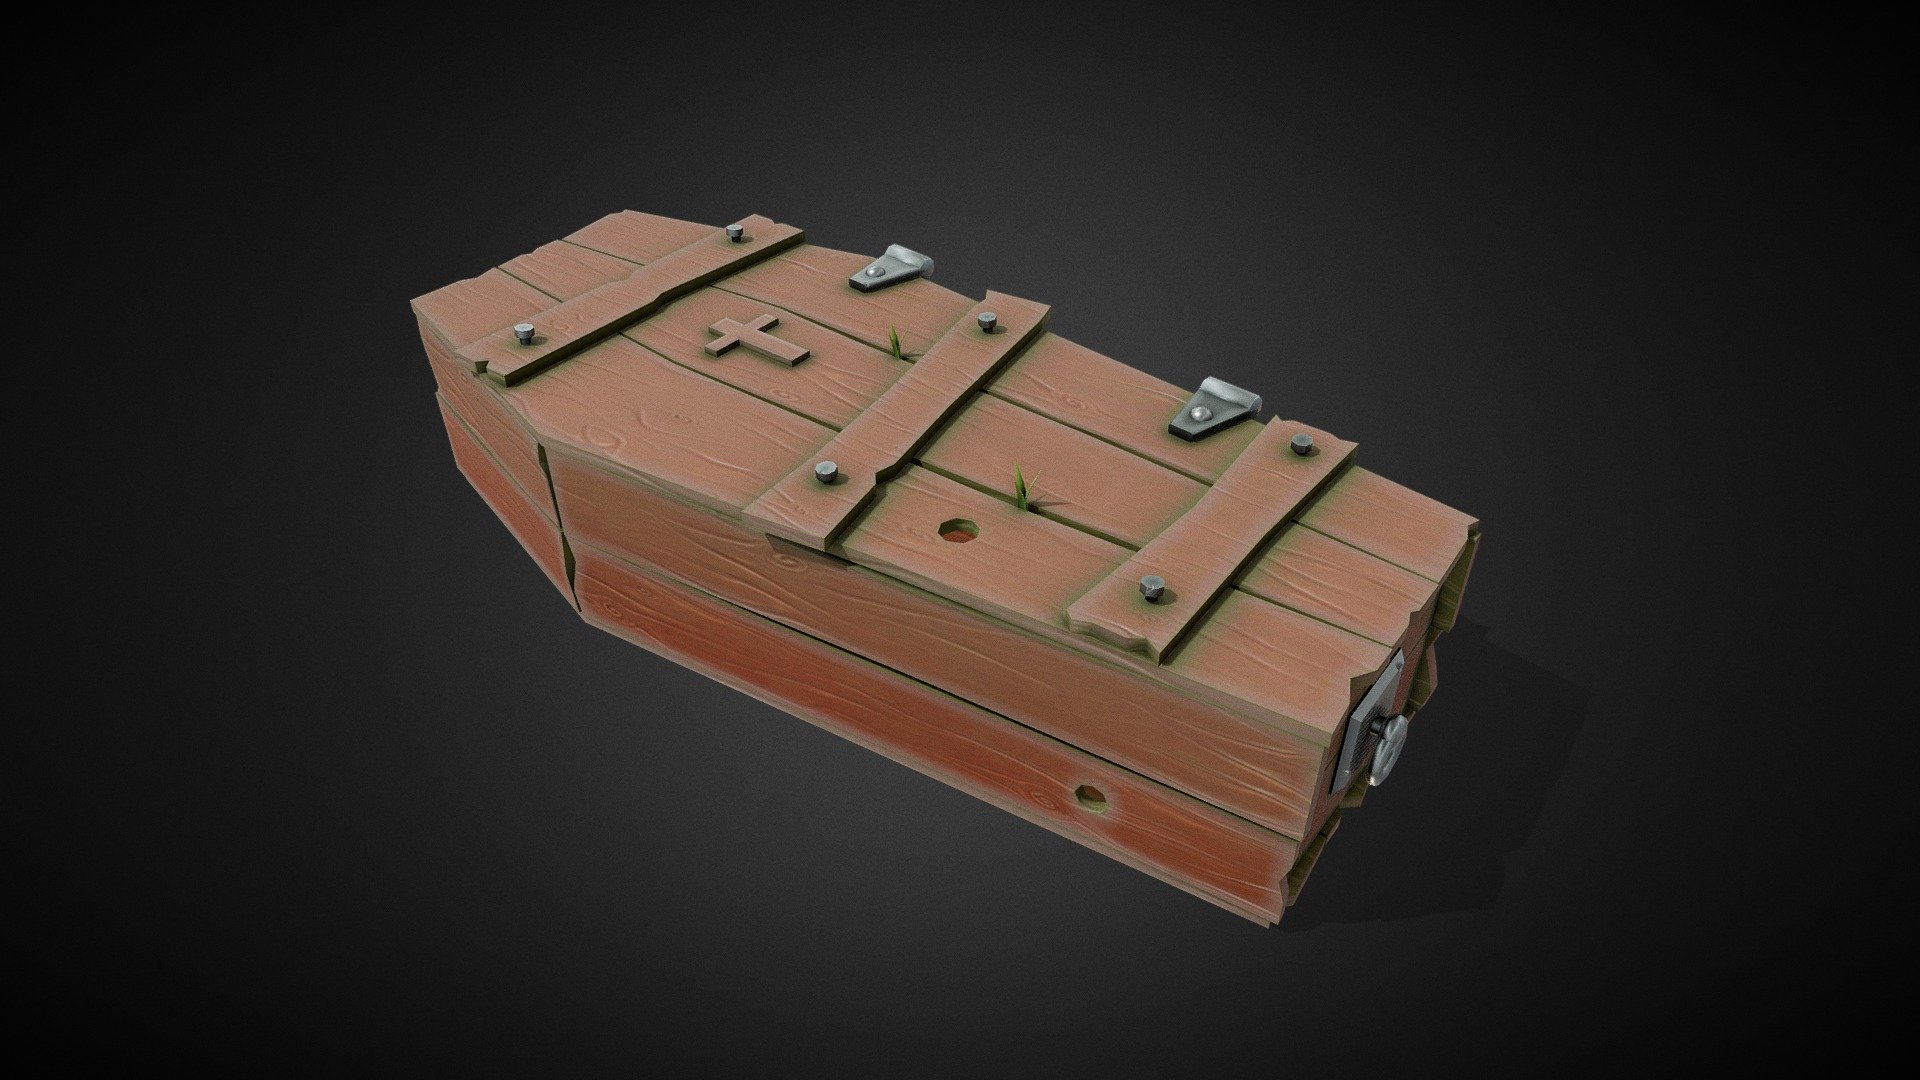 Tutorial here: https://www.youtube.com/channel/UC3R6lDf-Rlb9QW-D3CnhR7w[/B]

The model works perfectly in close-ups and high quality renders. It was originally modelled in 3ds Max 16, textured in Substance Painter and rendered with Marmoset Toolbag 3.

What is in the archive: MAX_16; OBJ; FBX ; Textures (2k resolution)

Features: Model resolutions are optimized for polygon efficiency. Model is fully textured with all materials applied. All textures and materials are included and mapped in every format. Autodesk 3ds Max models grouped for easy selection &amp; objects are logically named for ease of scene management. No cleaning up necessary, just drop model into your scene and start rendering. No special plugin needed to open scene.

Textures formats: PNG (2K) - Stylized Coffin - Tutorial Included - Buy Royalty Free 3D model by ninashaw 3d model